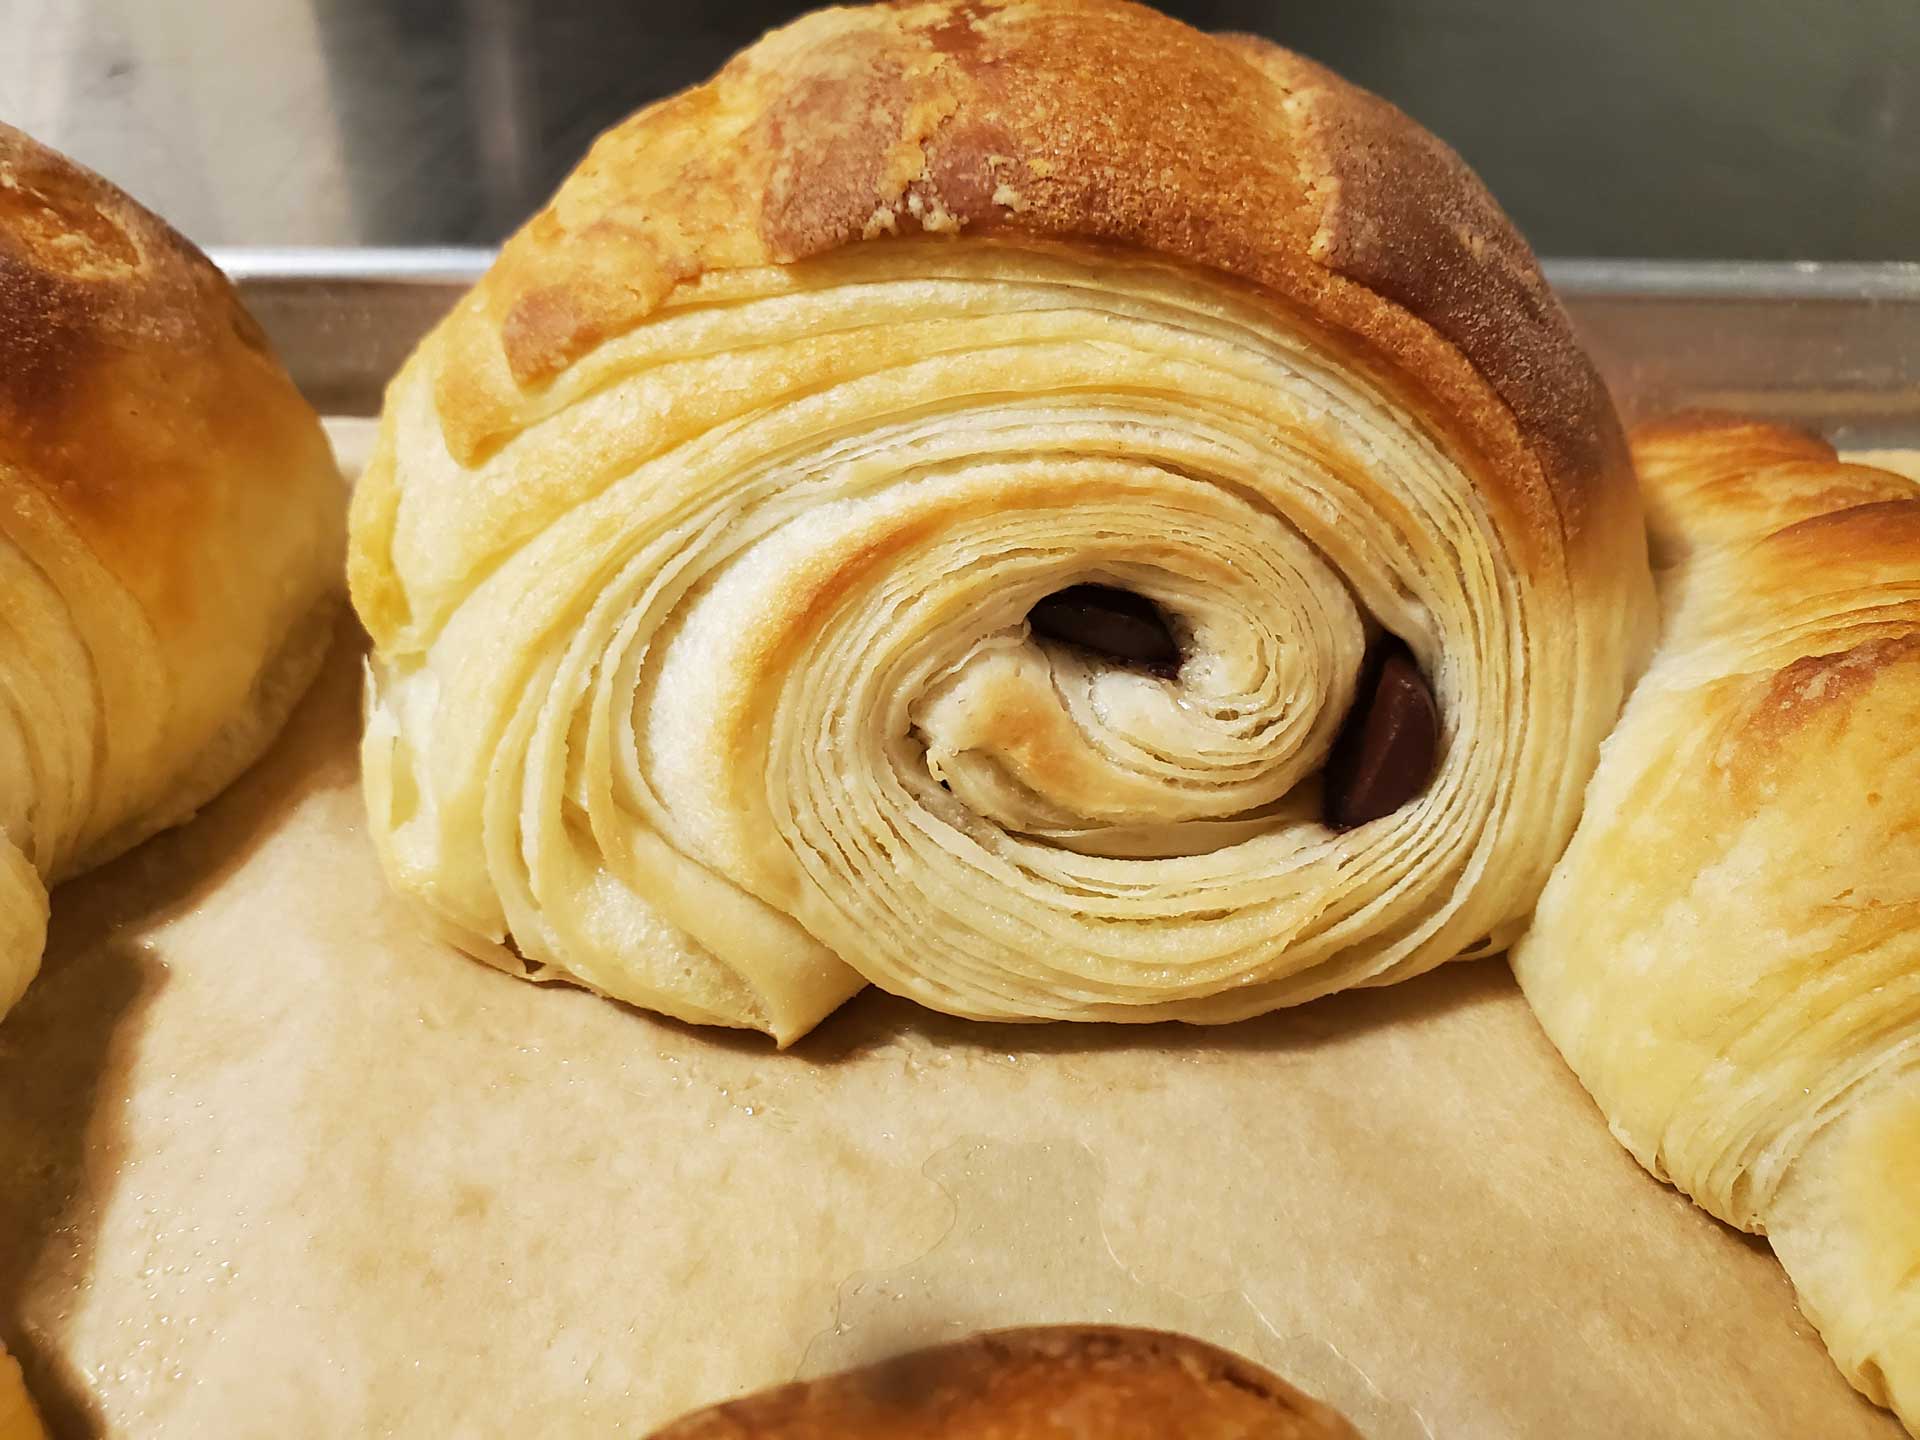 A close-up of a freshly baked, golden-brown croissant with visible layers of flaky pastry, resting on a parchment-lined baking sheet. The croissant has a swirl pattern in the center, revealing its intricate, buttery layers and a hint of chocolate filling.